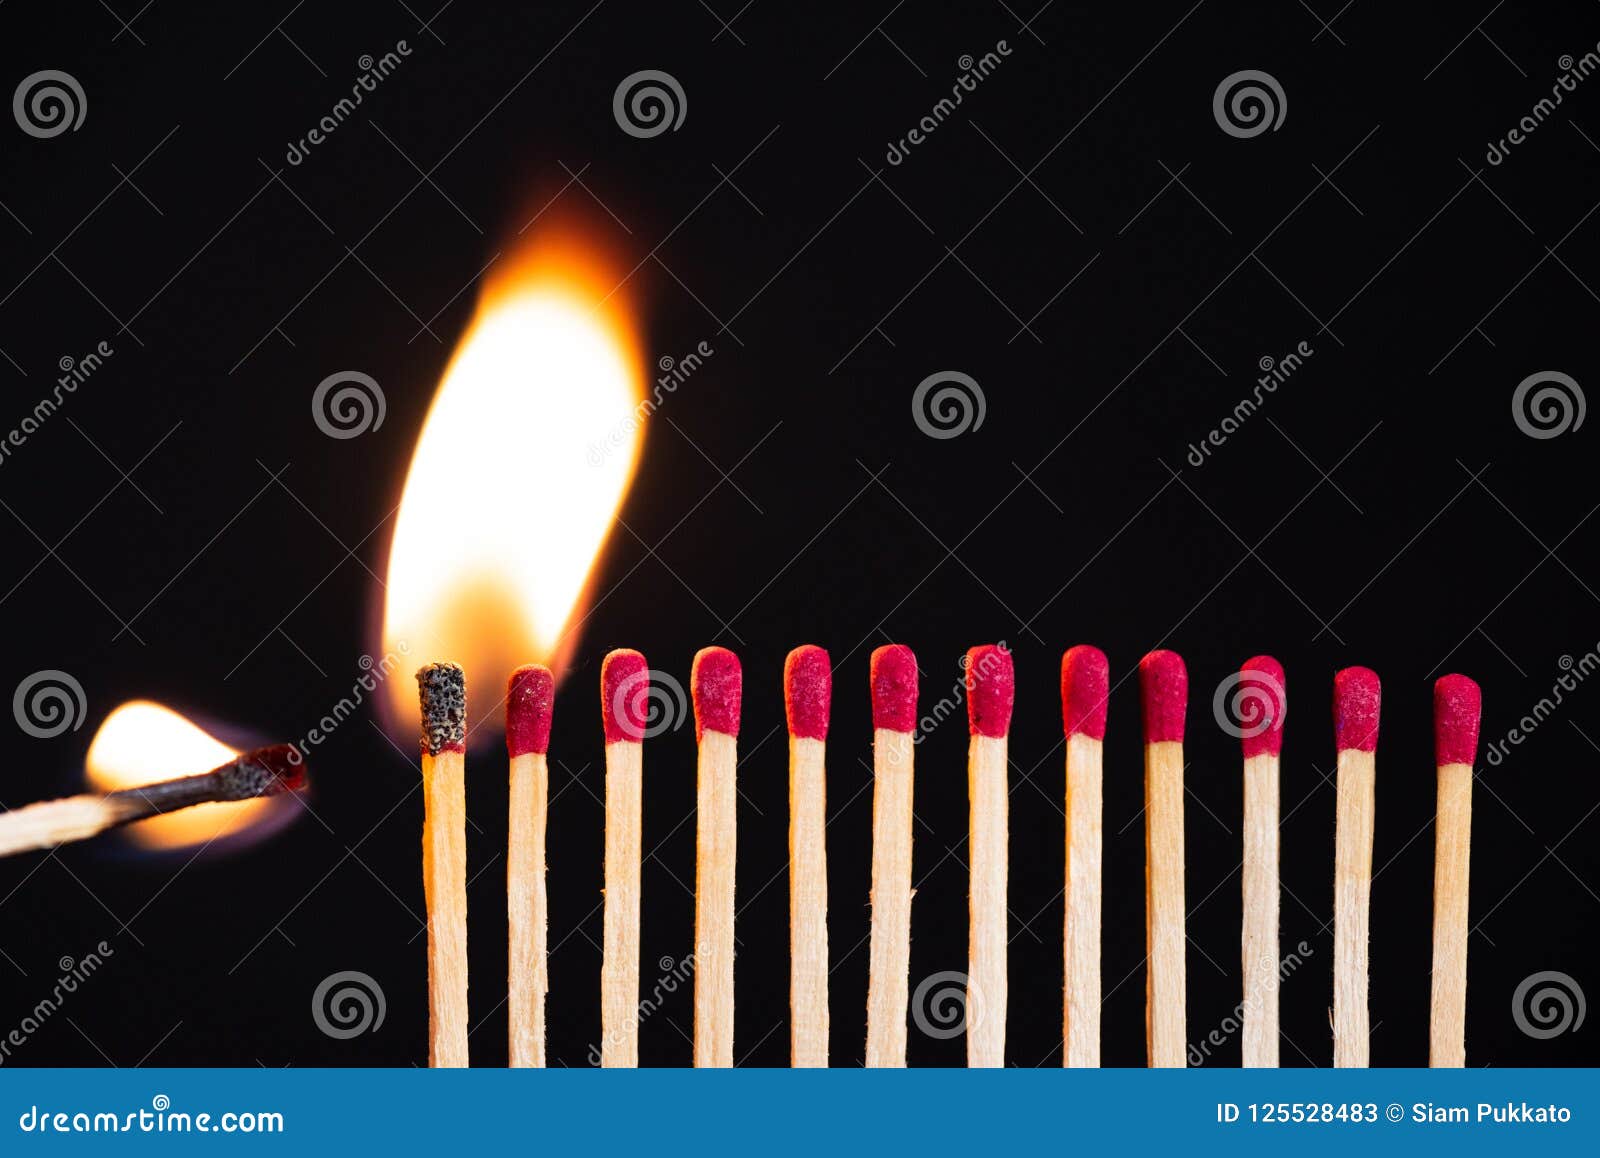 lit match next to a row of unlit matches. the passion of one ignites new ideas, change in others.